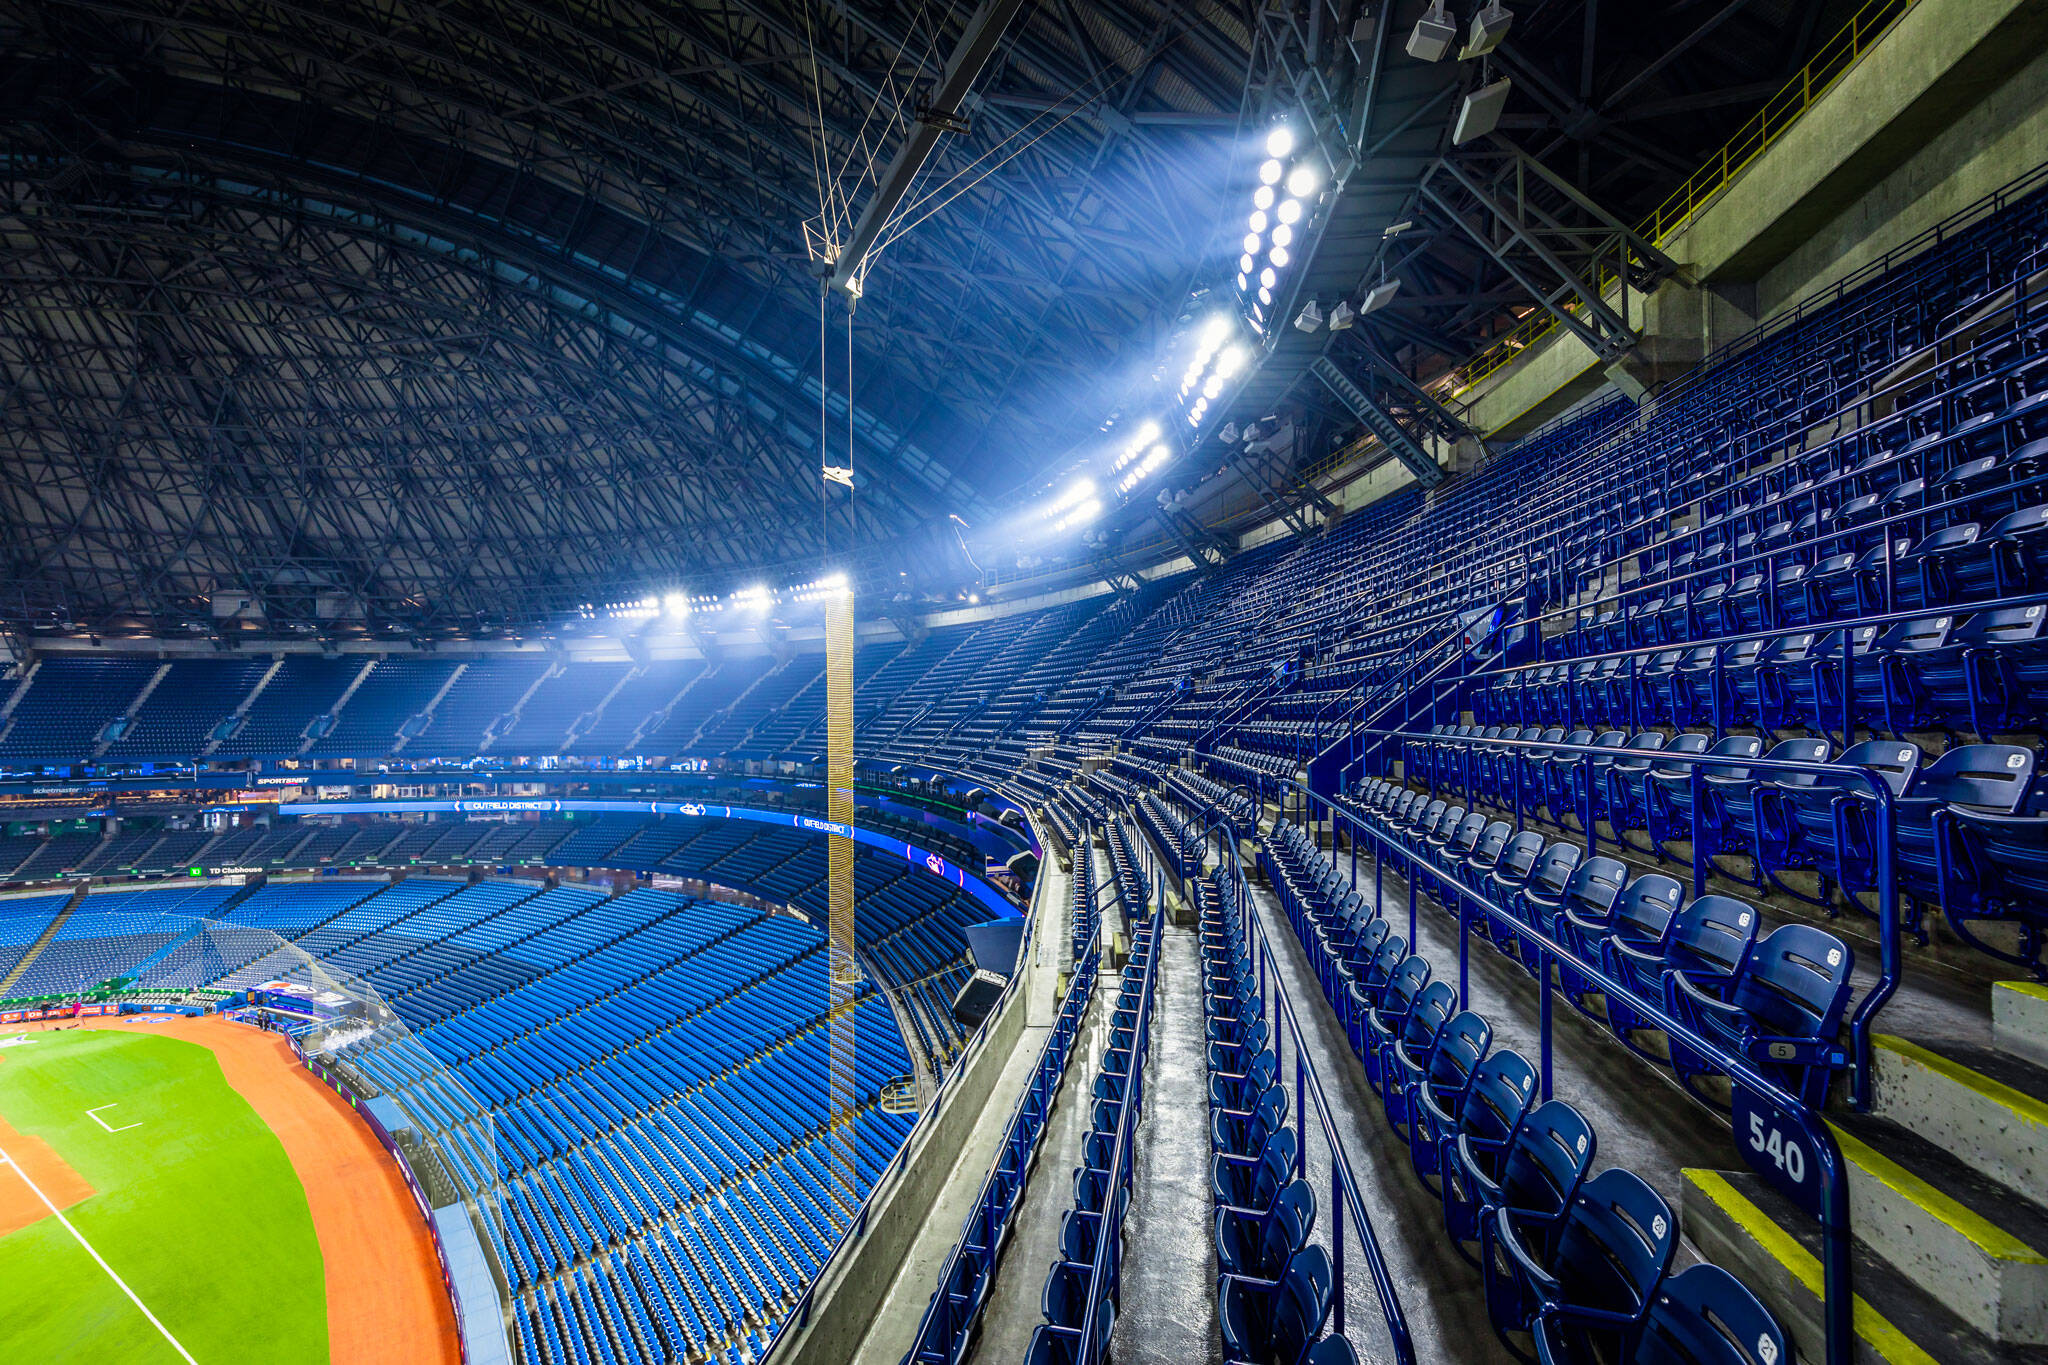 New look Rogers Centre outfield a potential boon for Blue Jays